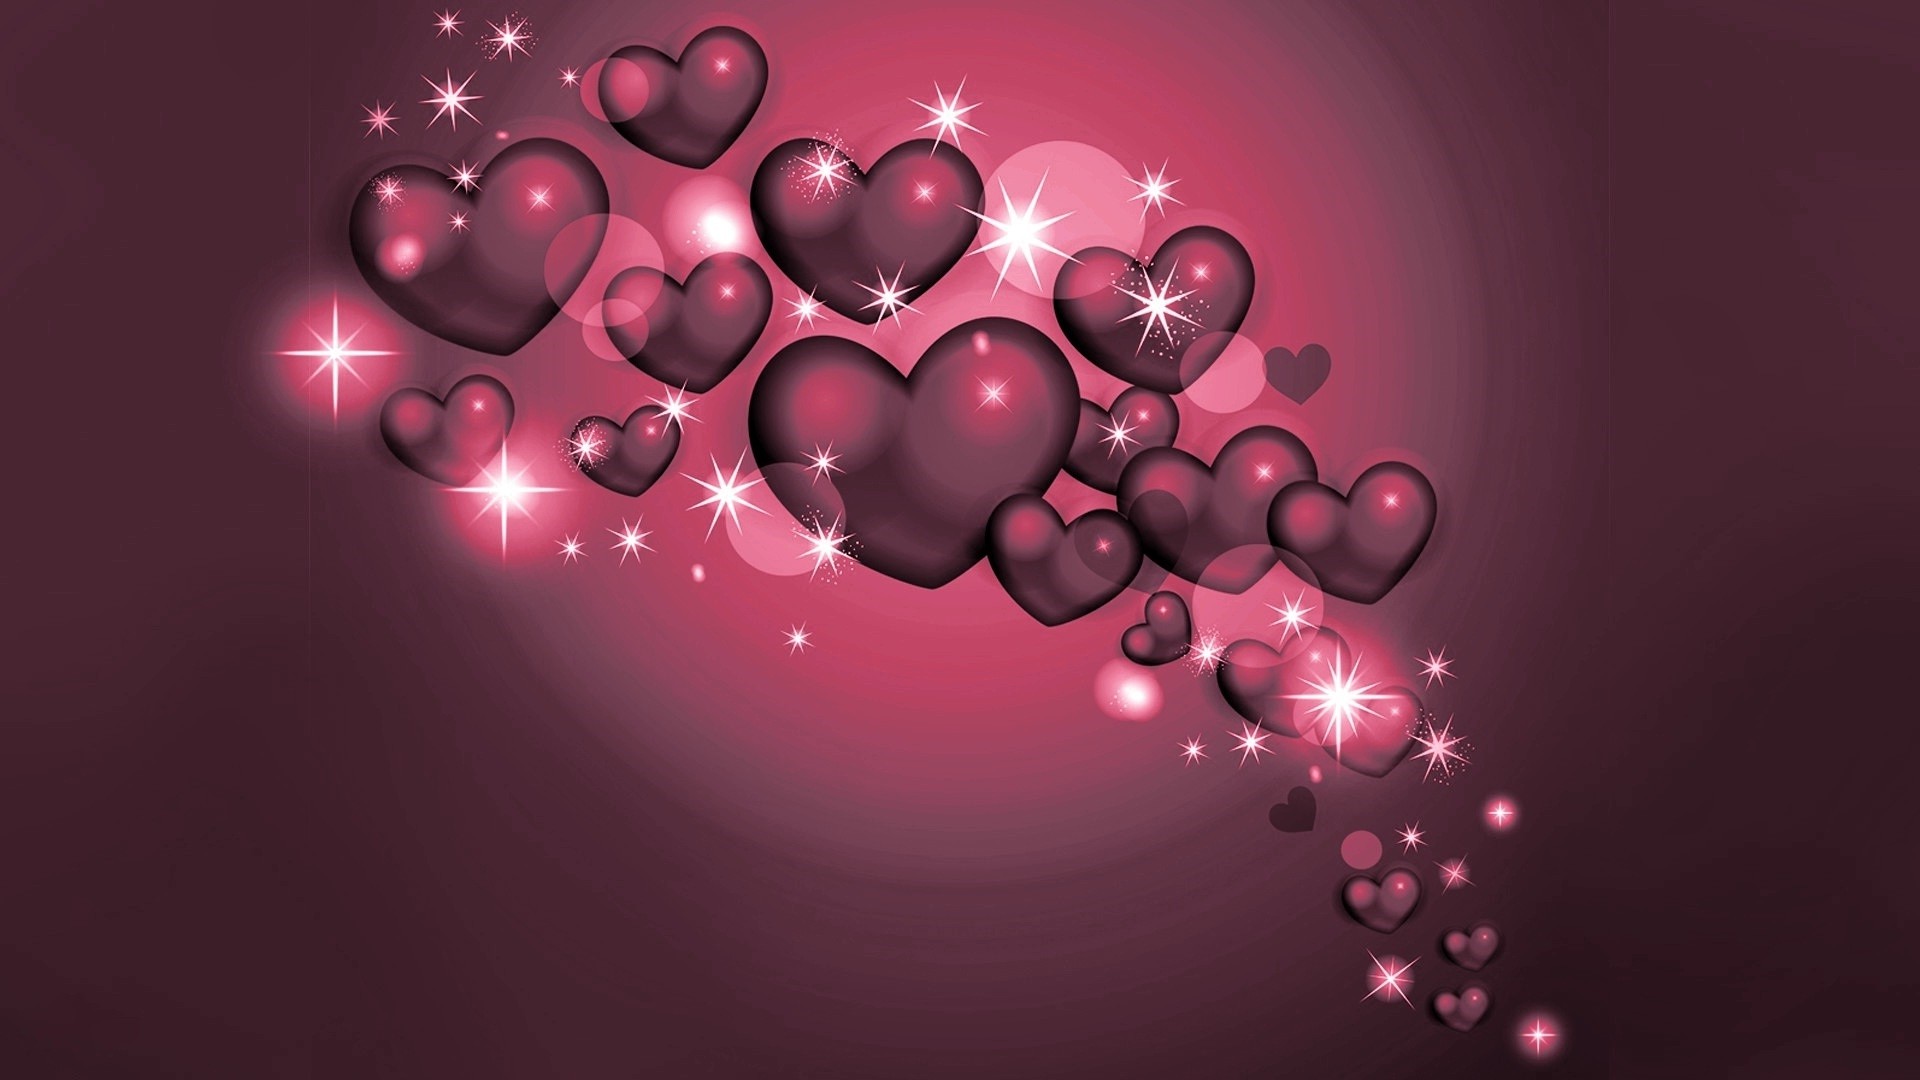 70 Love Hd Wallpapers on WallpaperPlay